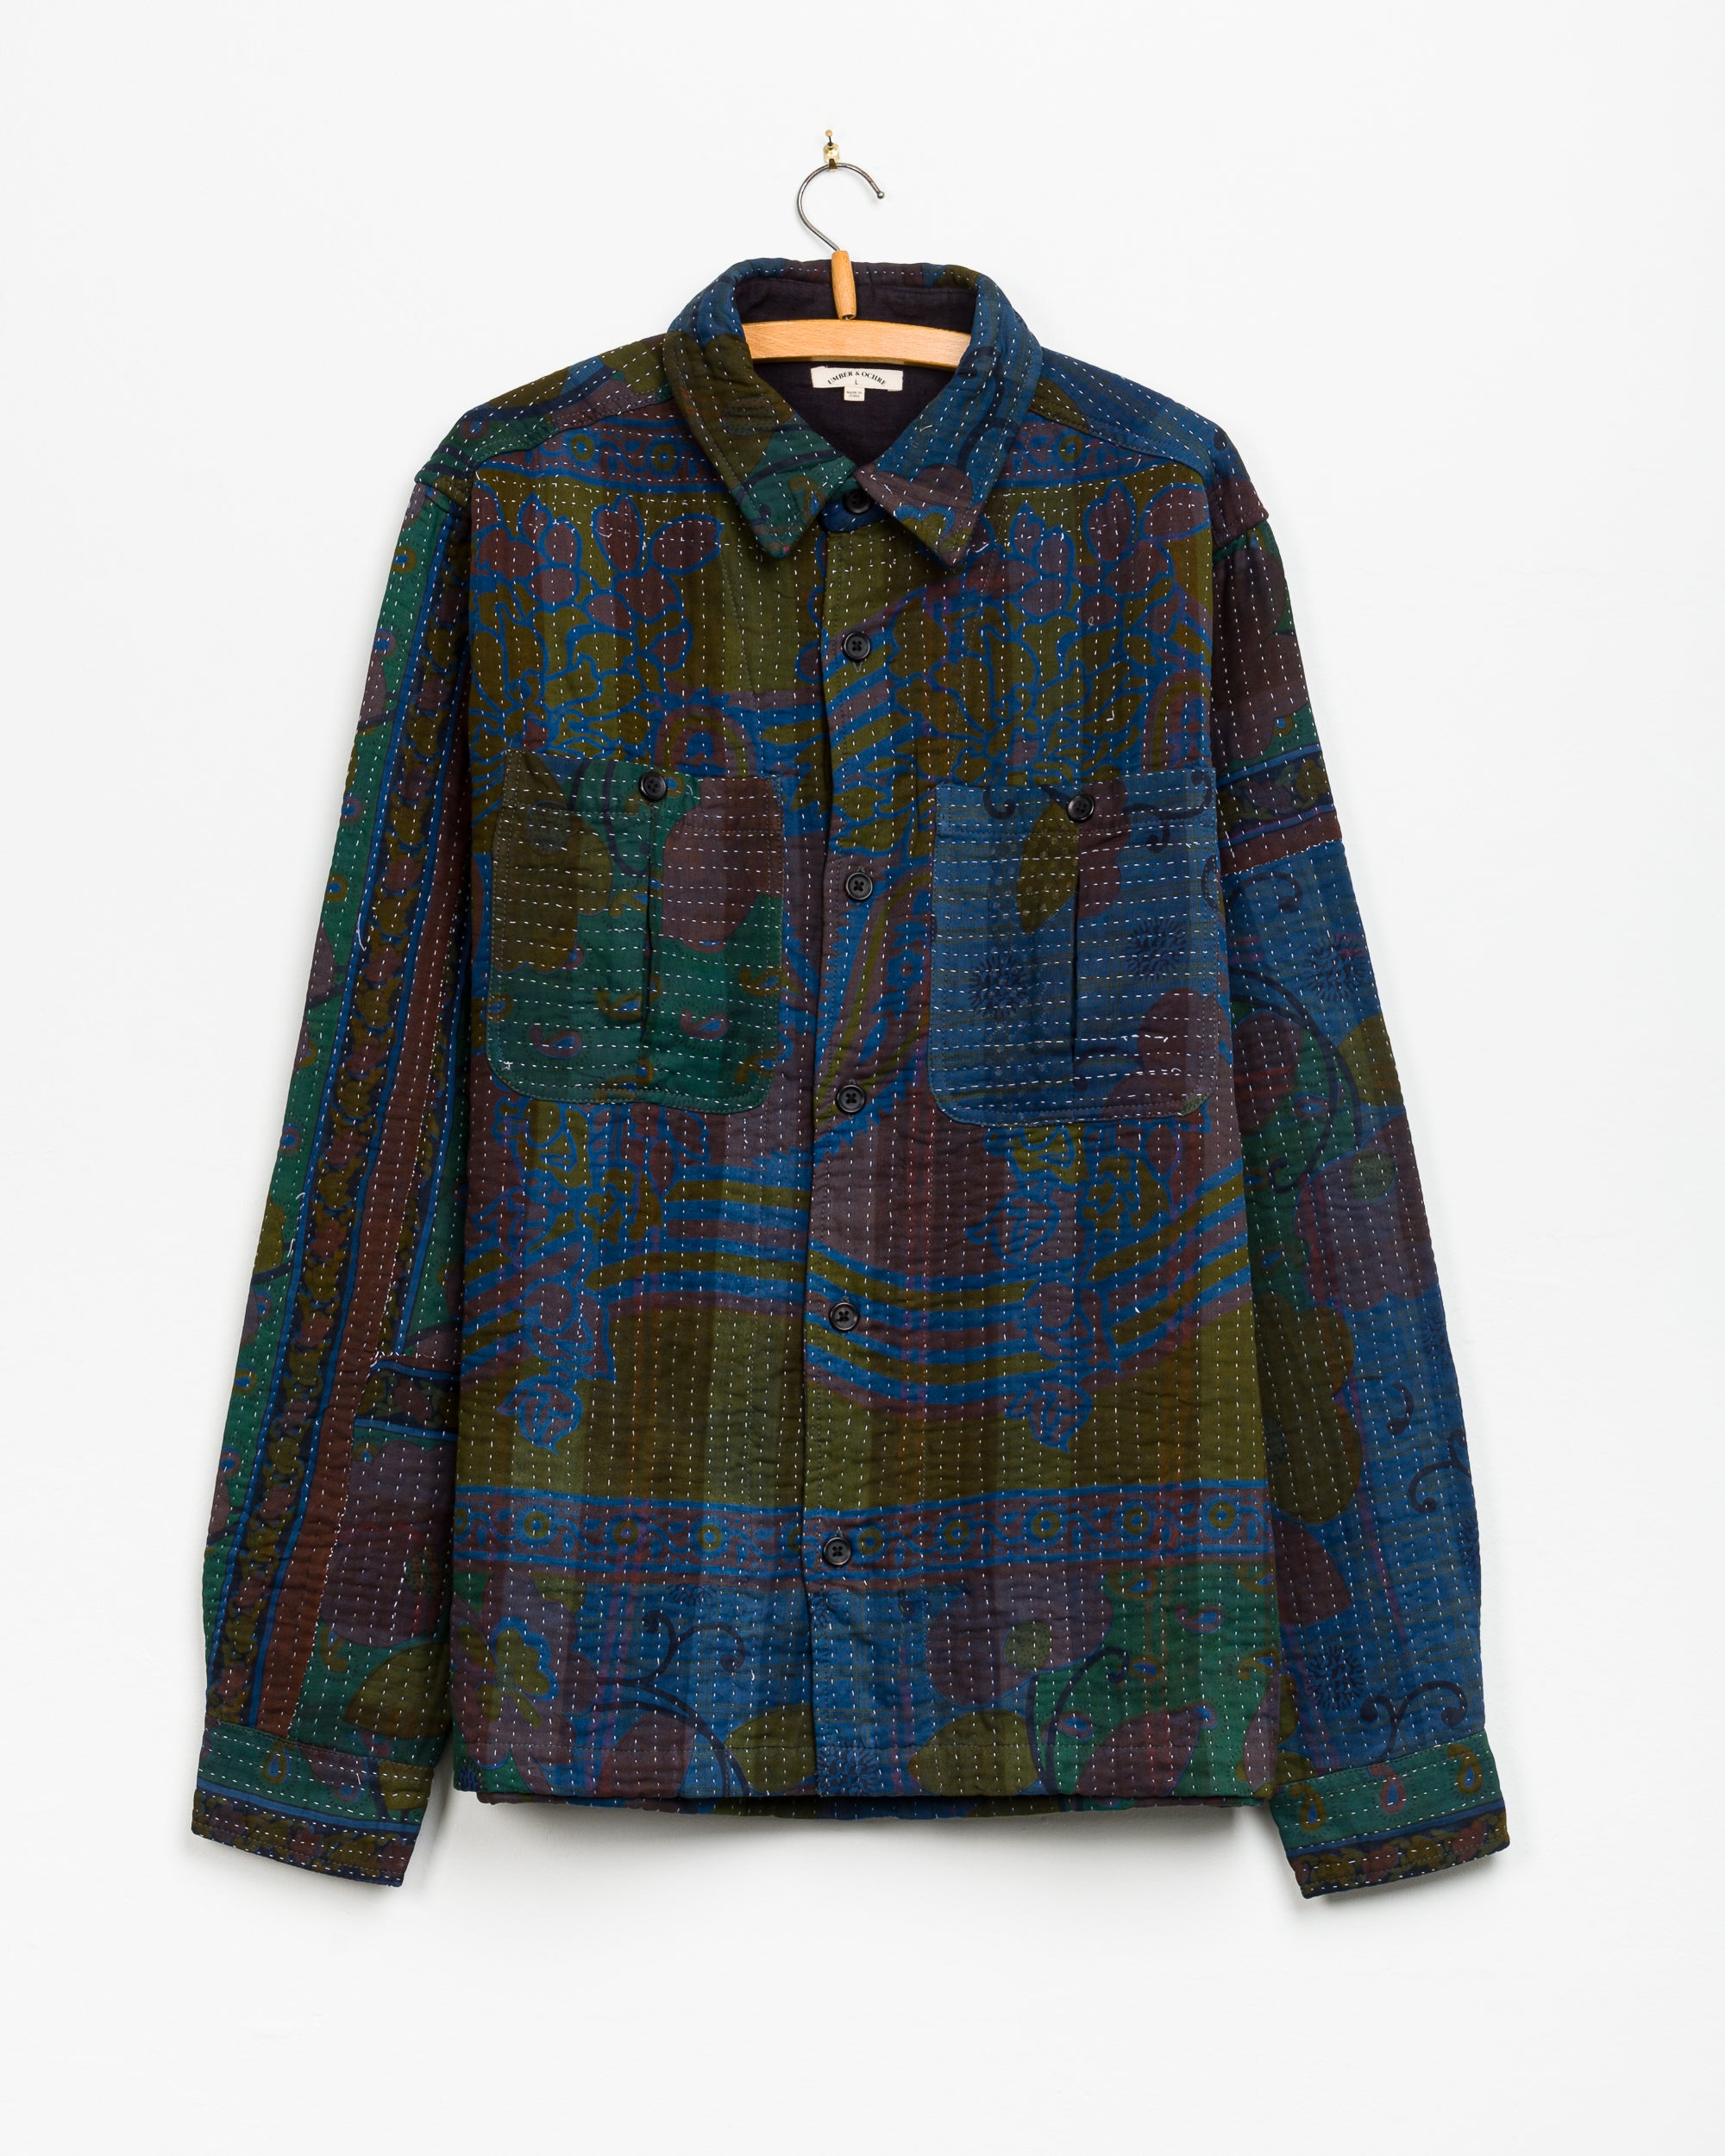 Vivek Overshirt in Quilted Kantha - L